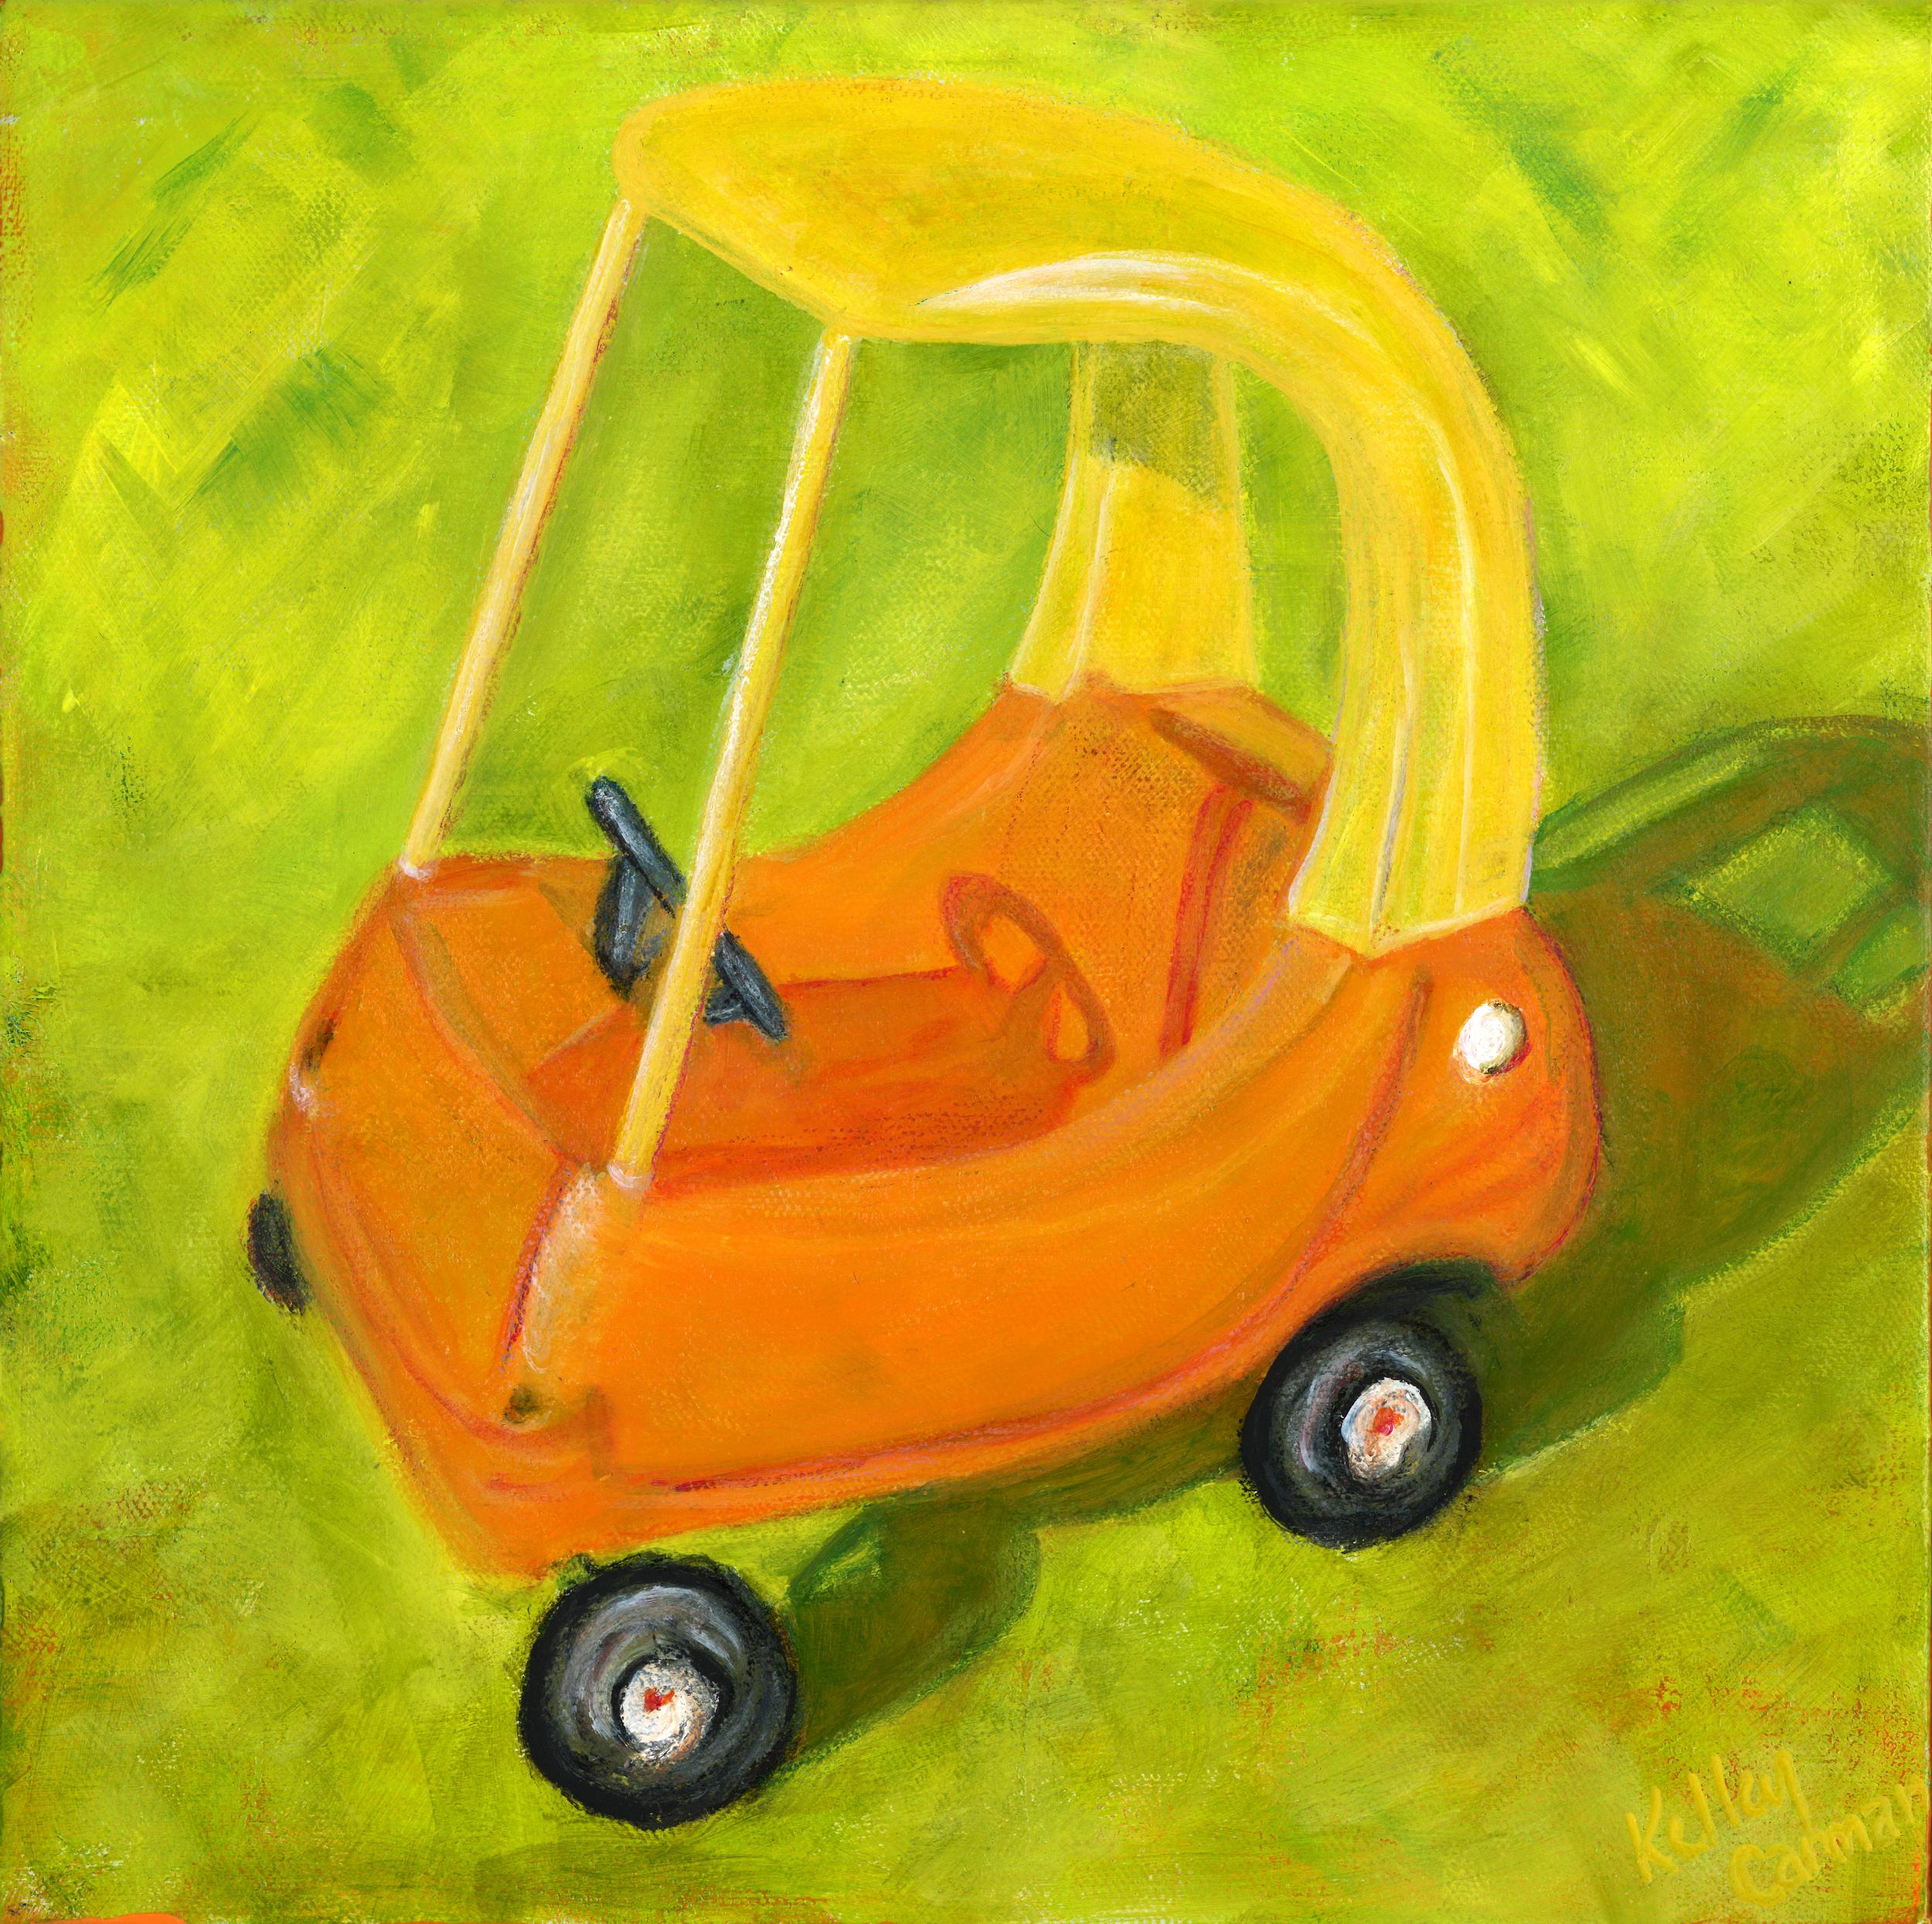 First Car (Figurative, Cozy, Coupe, Yellow, Orange, Green, Car)